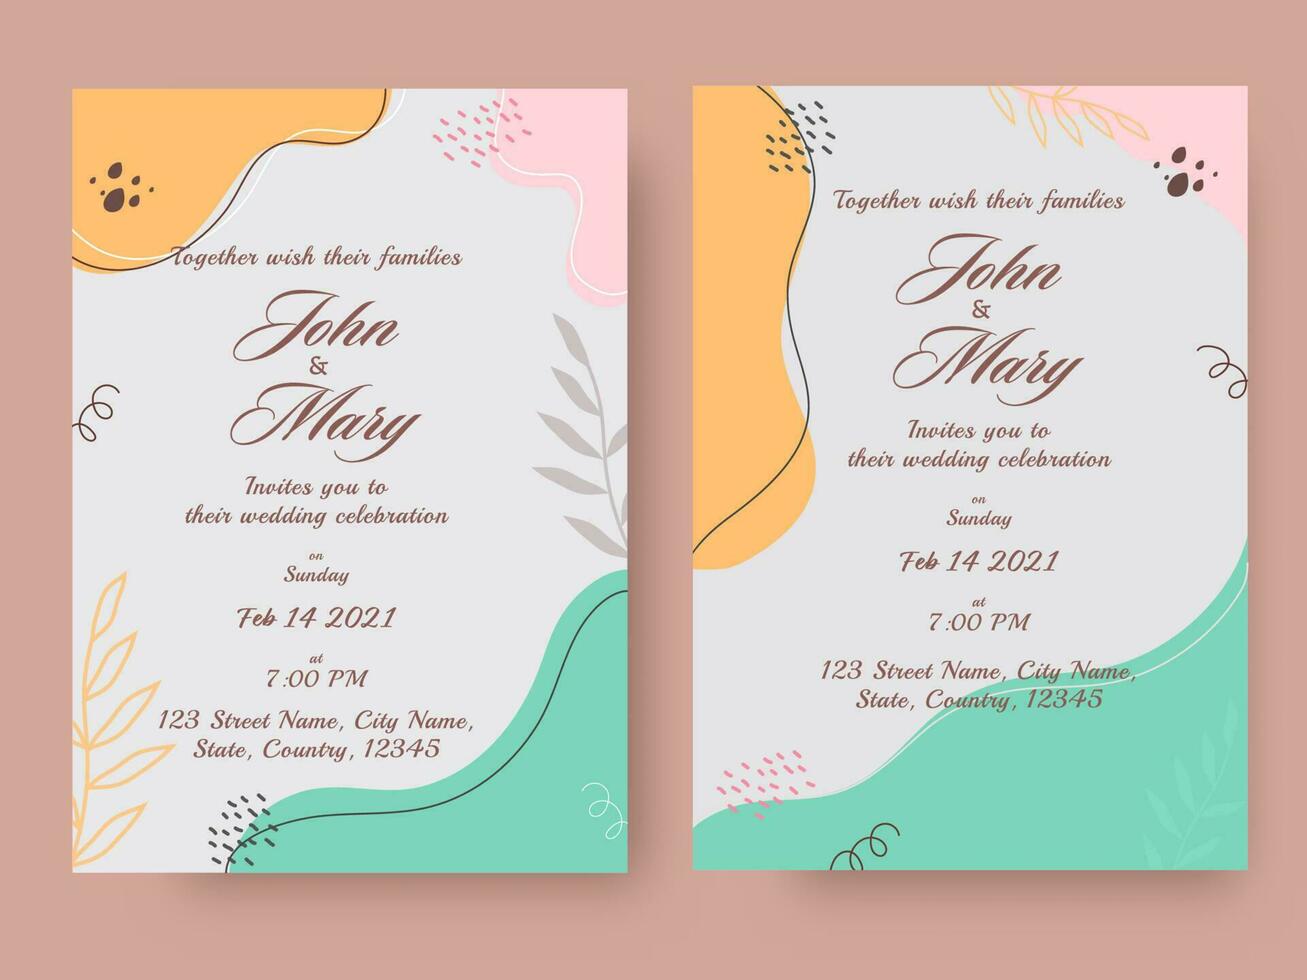 Wedding Invitation Card Template Layout In Two Options. vector